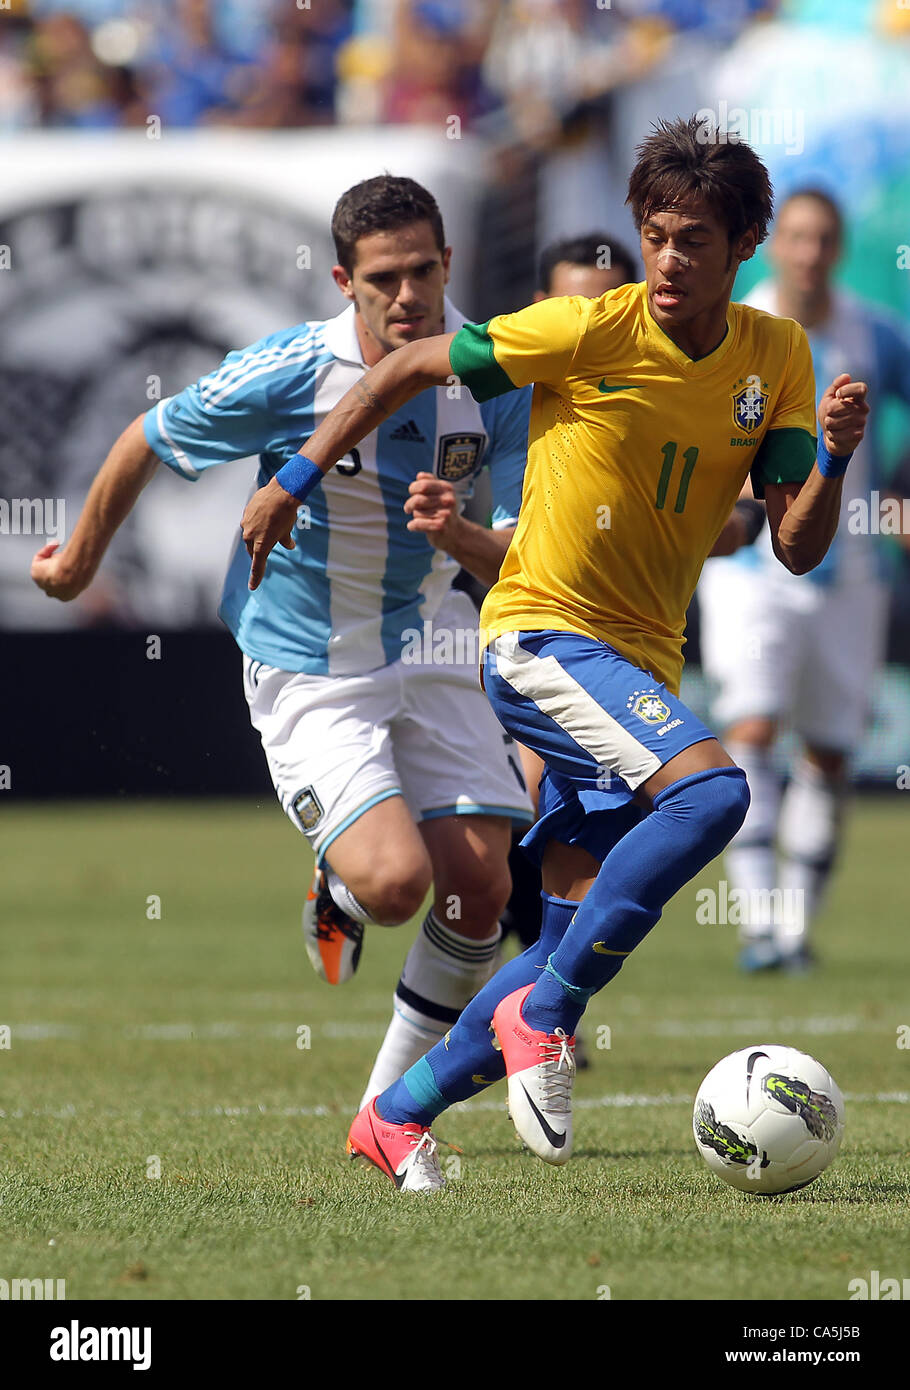 09.06.2012. New Jersey, USA. Fernando Gago (5) of Argentina chases after Neymar (11) of Brazil during an international friendly match at Metlife Stadium in East Rutherford,New Jersey. Argentina won 4-3. Stock Photo